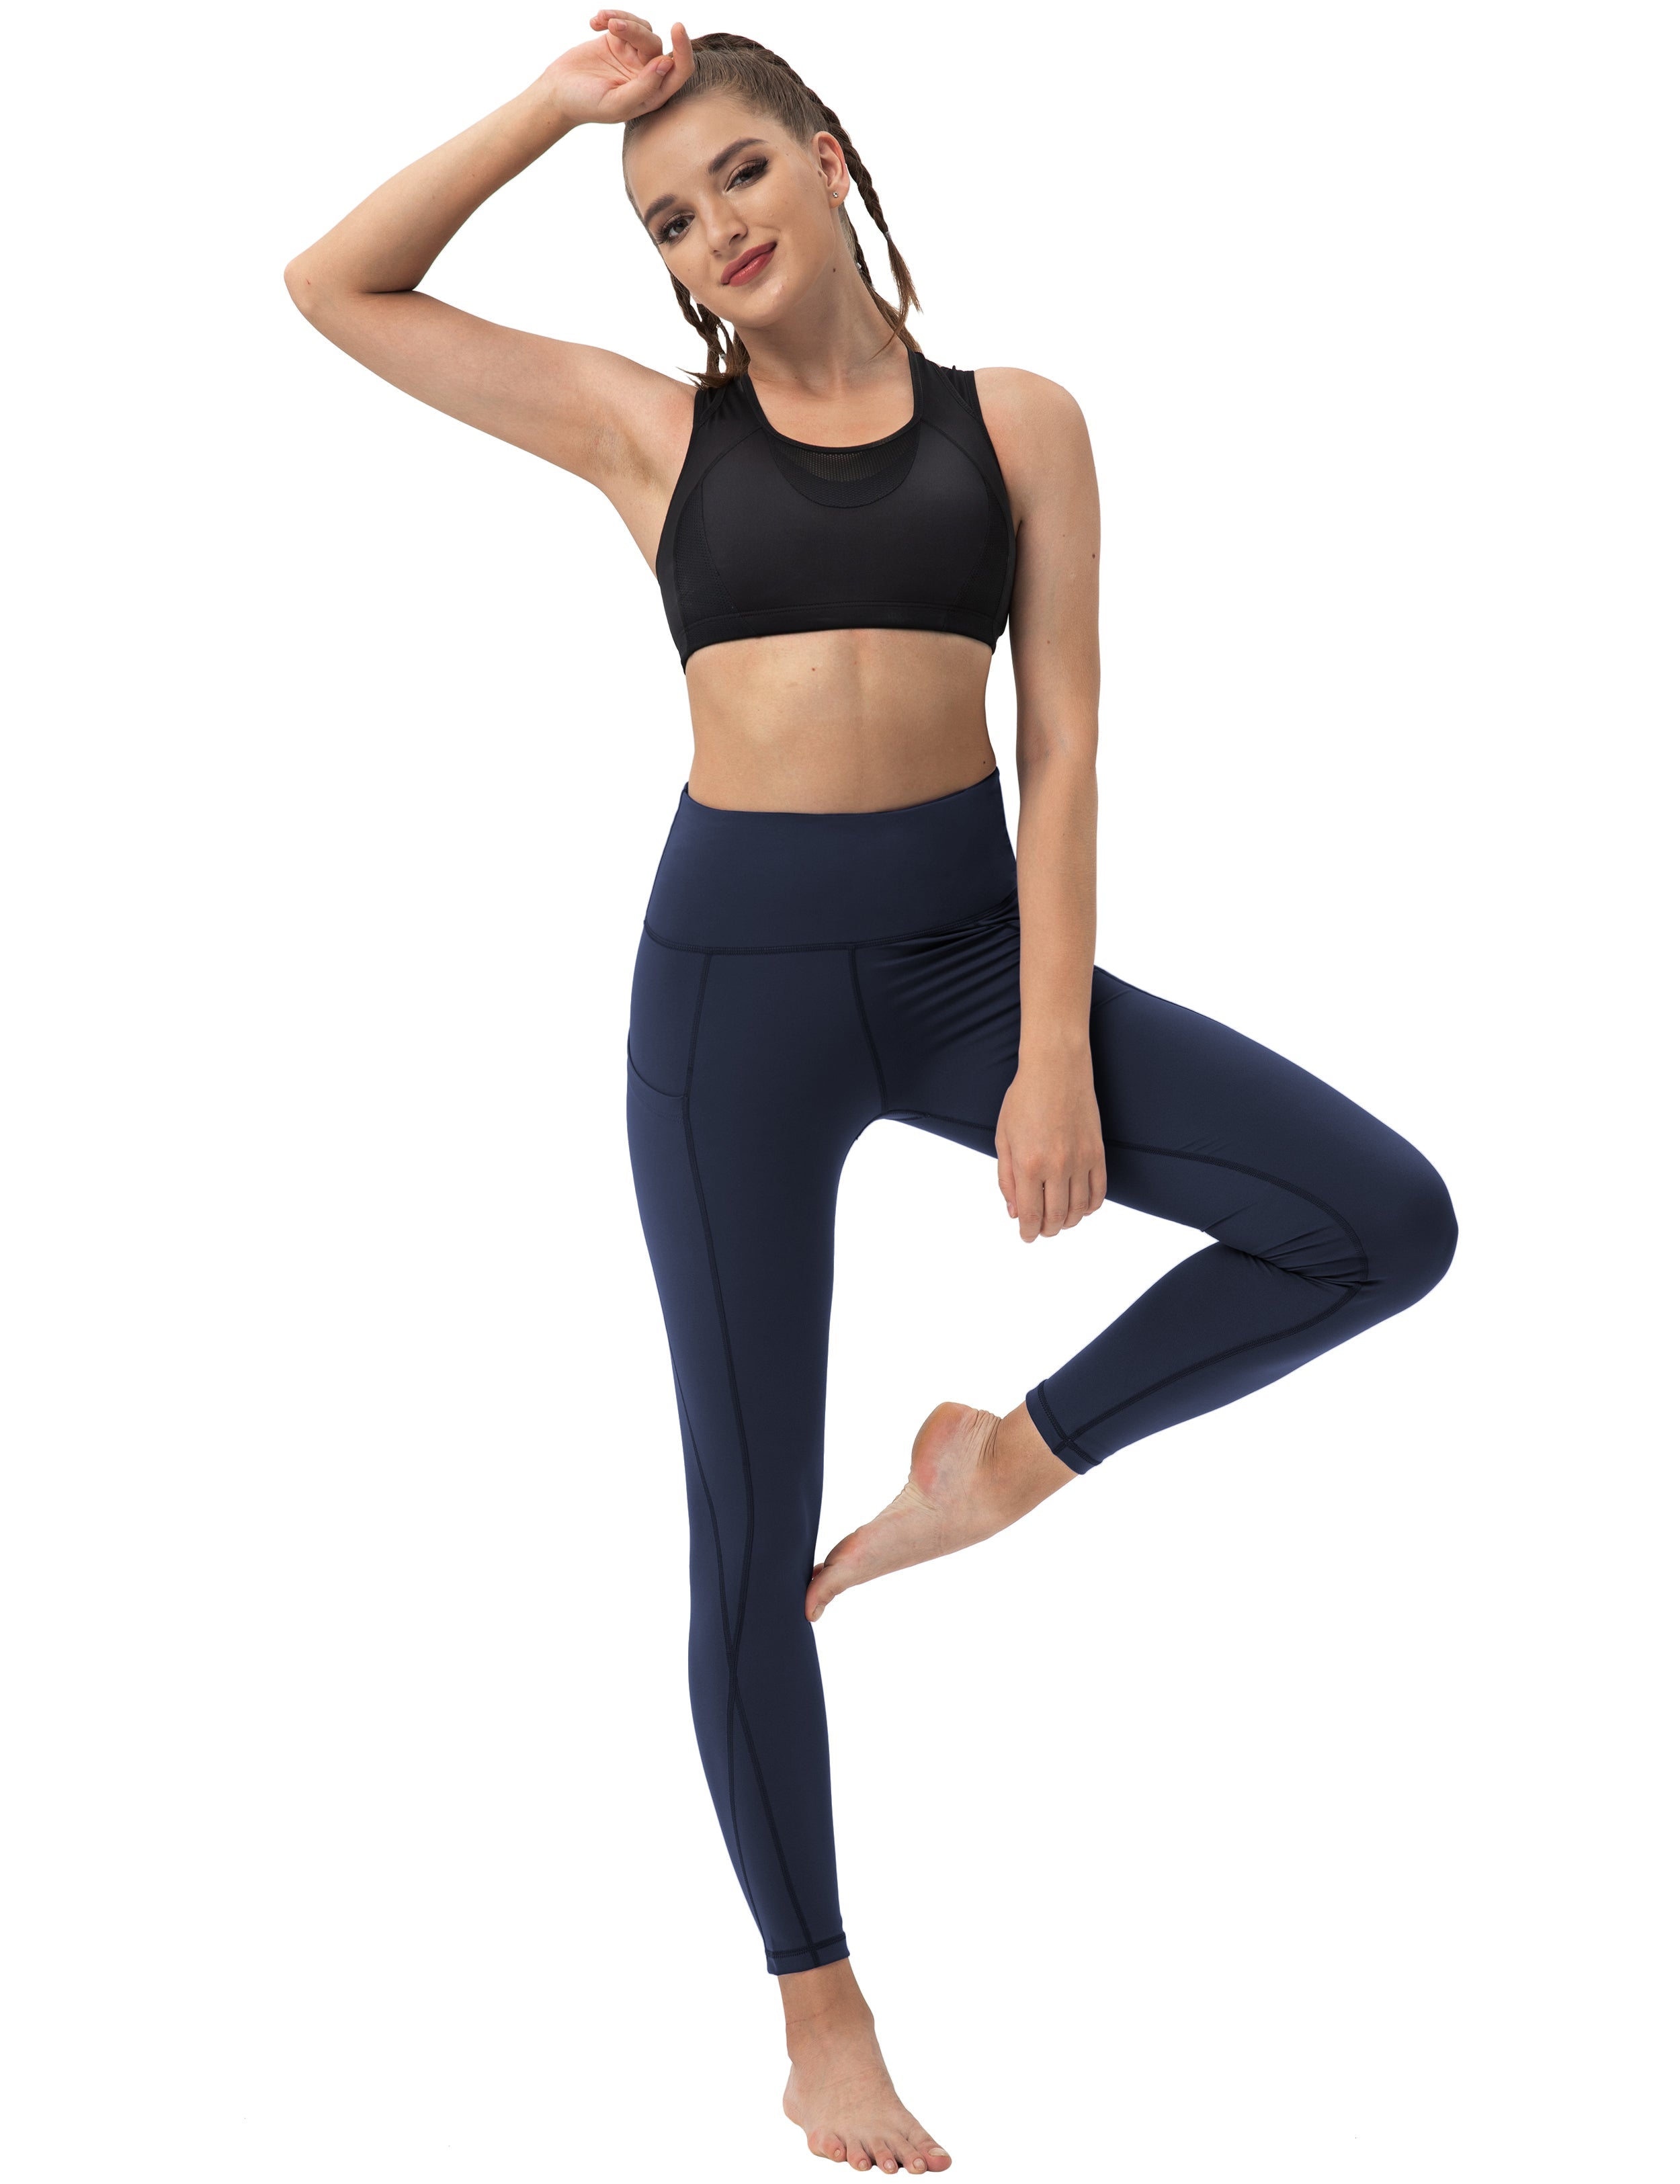 High Waist Side Pockets Tall Size Pants darknavy 75% Nylon, 25% Spandex Fabric doesn't attract lint easily 4-way stretch No see-through Moisture-wicking Tummy control Inner pocket